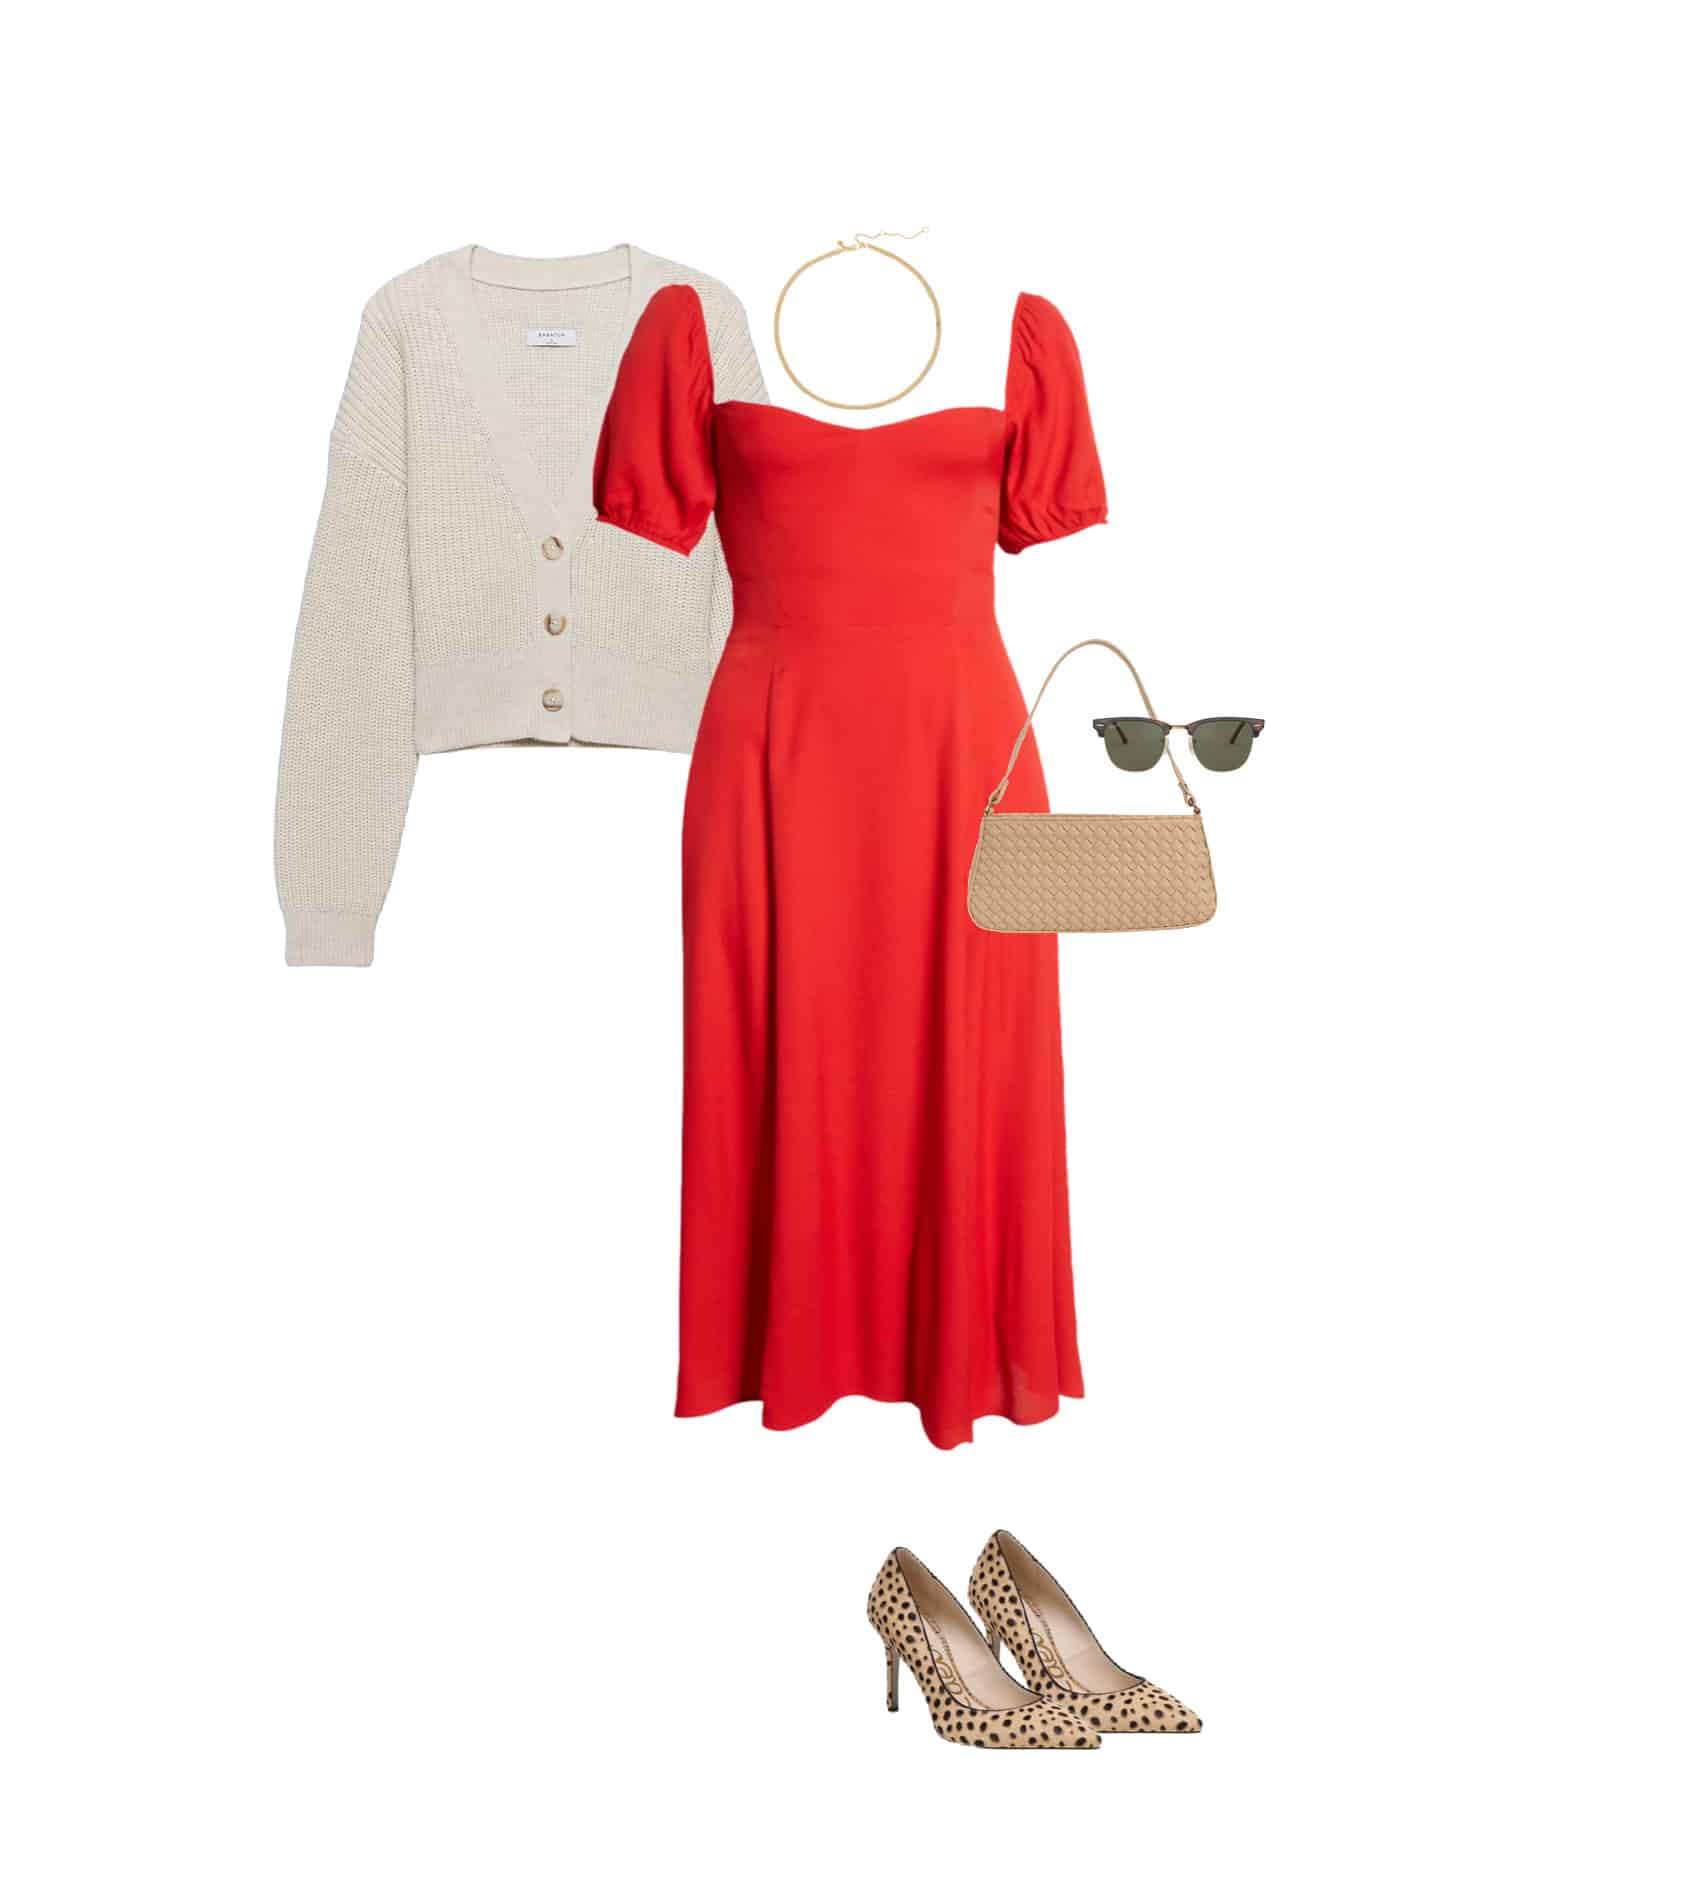 Outfit combination of a red dress with leopard print shoes